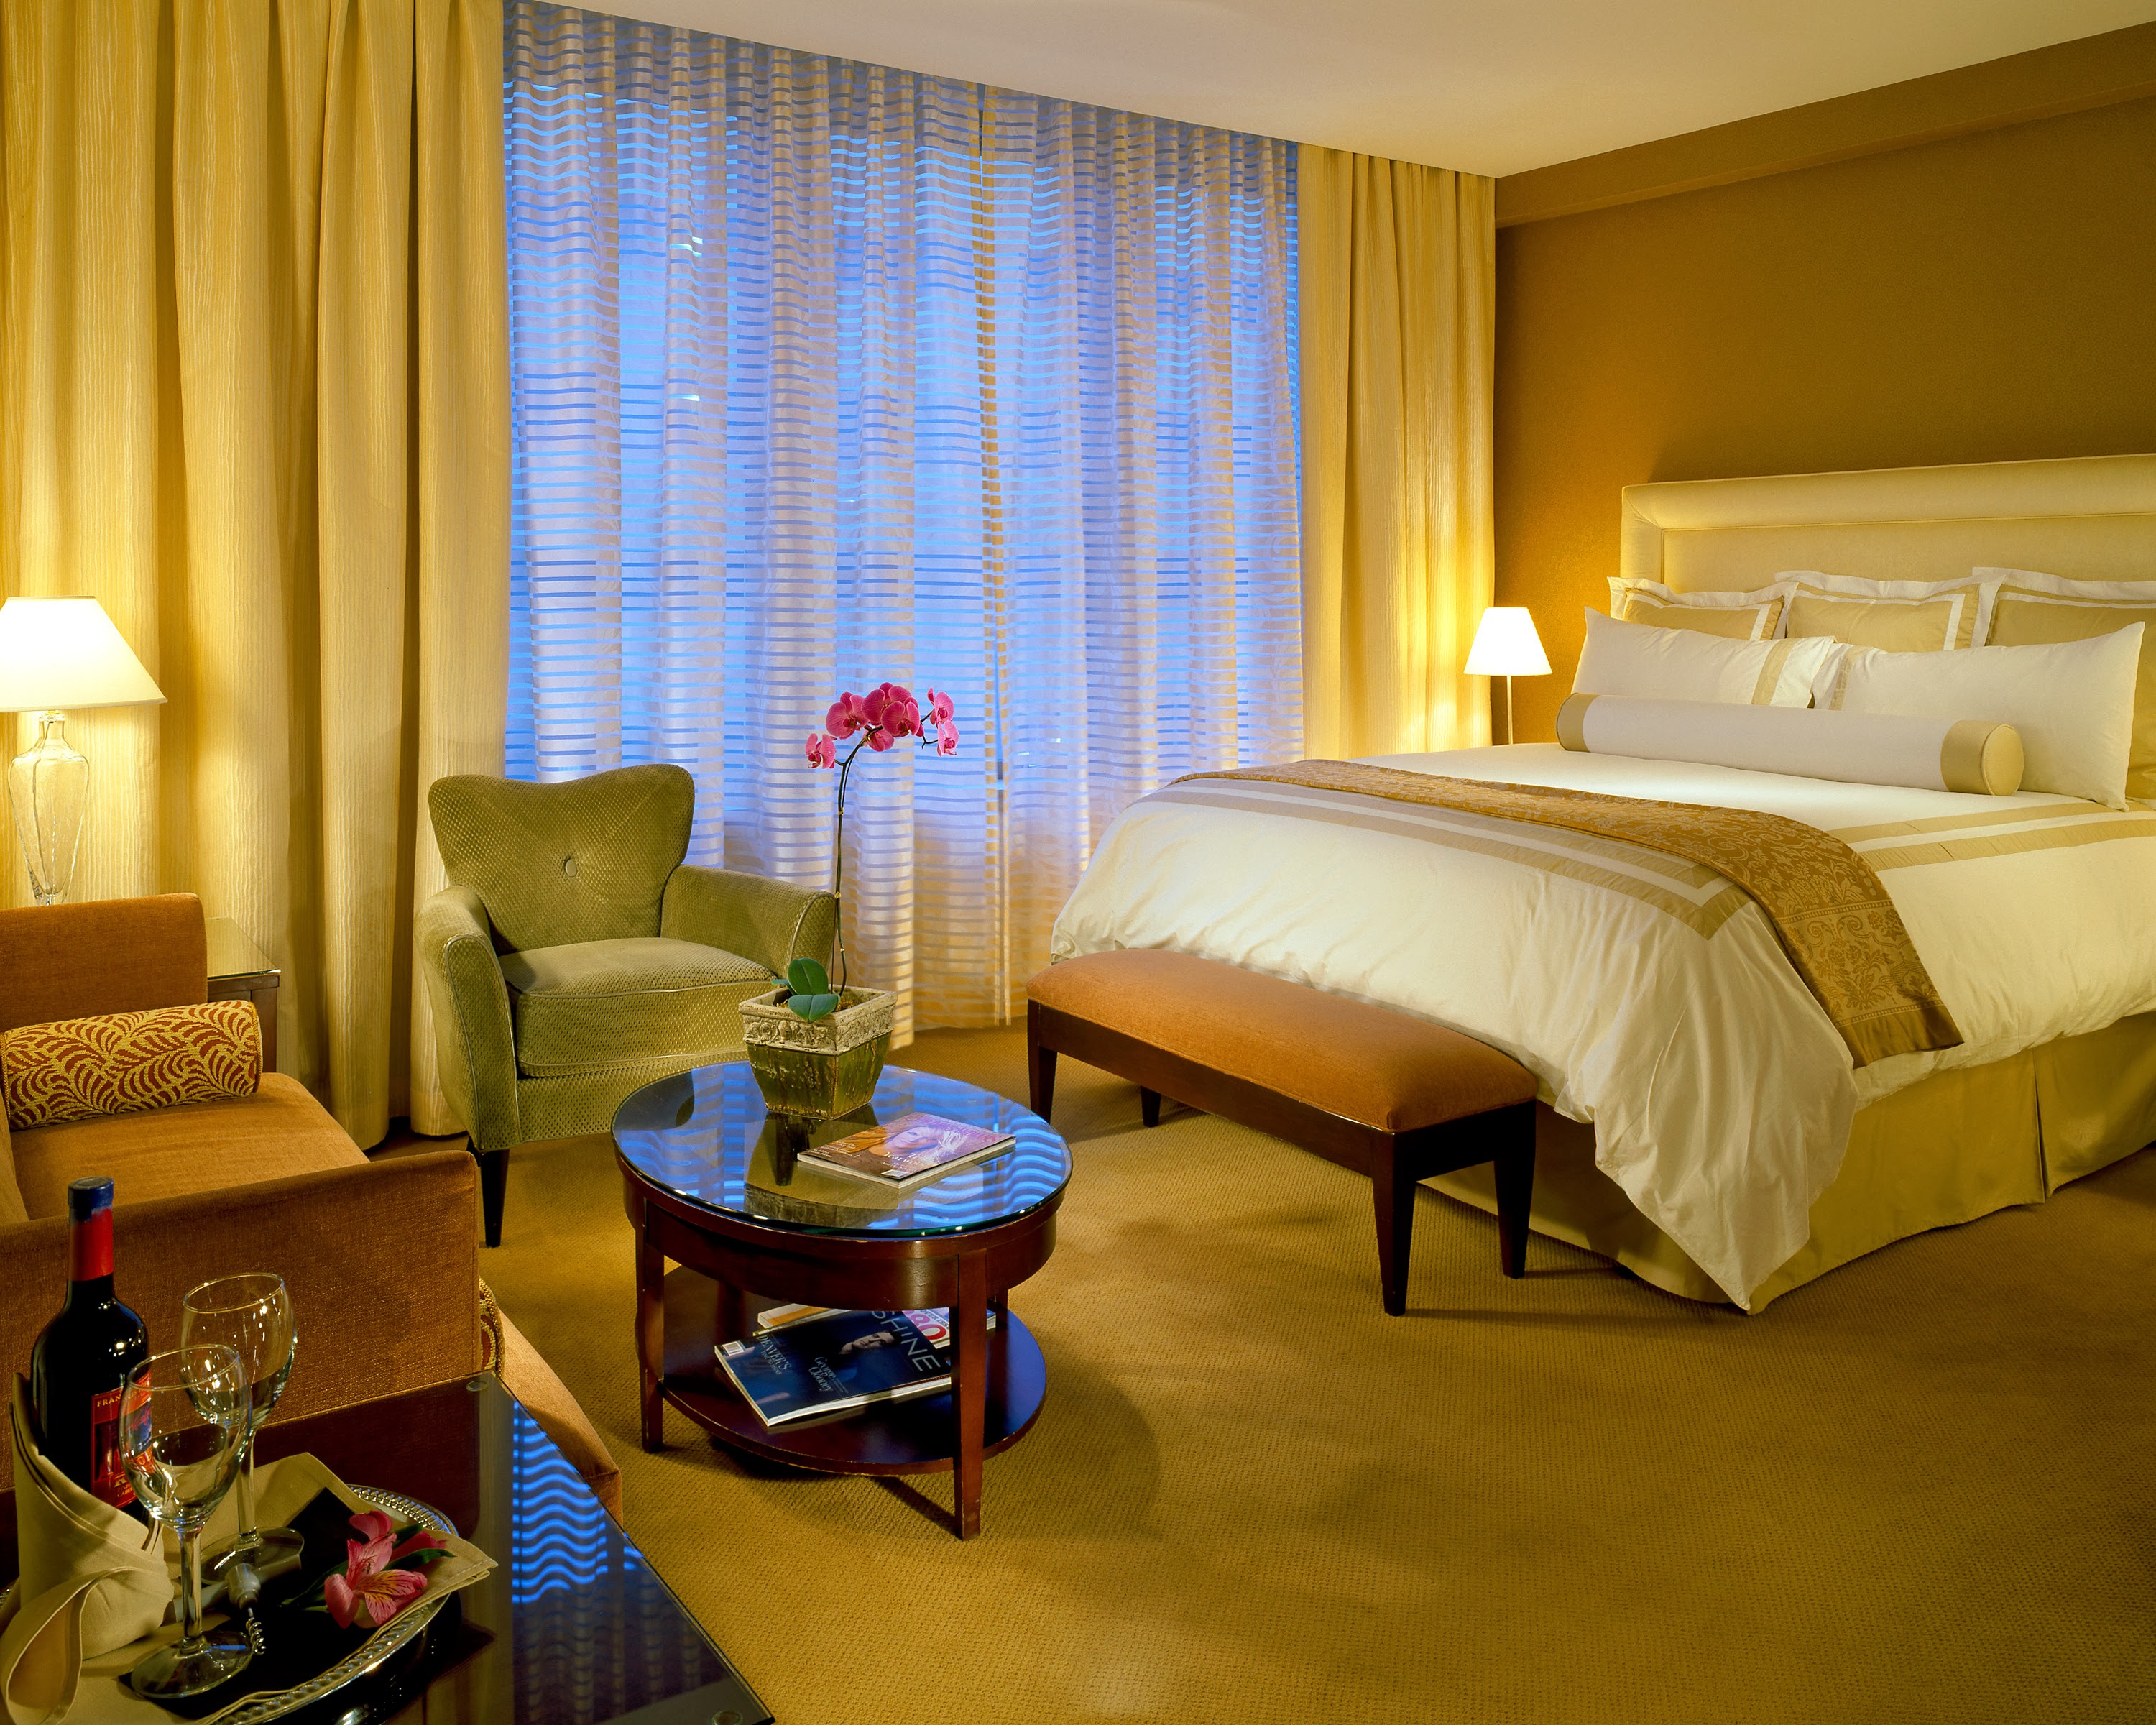 Hotel Teatro is a downtown Denver hotel located near popular Denver activities, attractions, and dining.